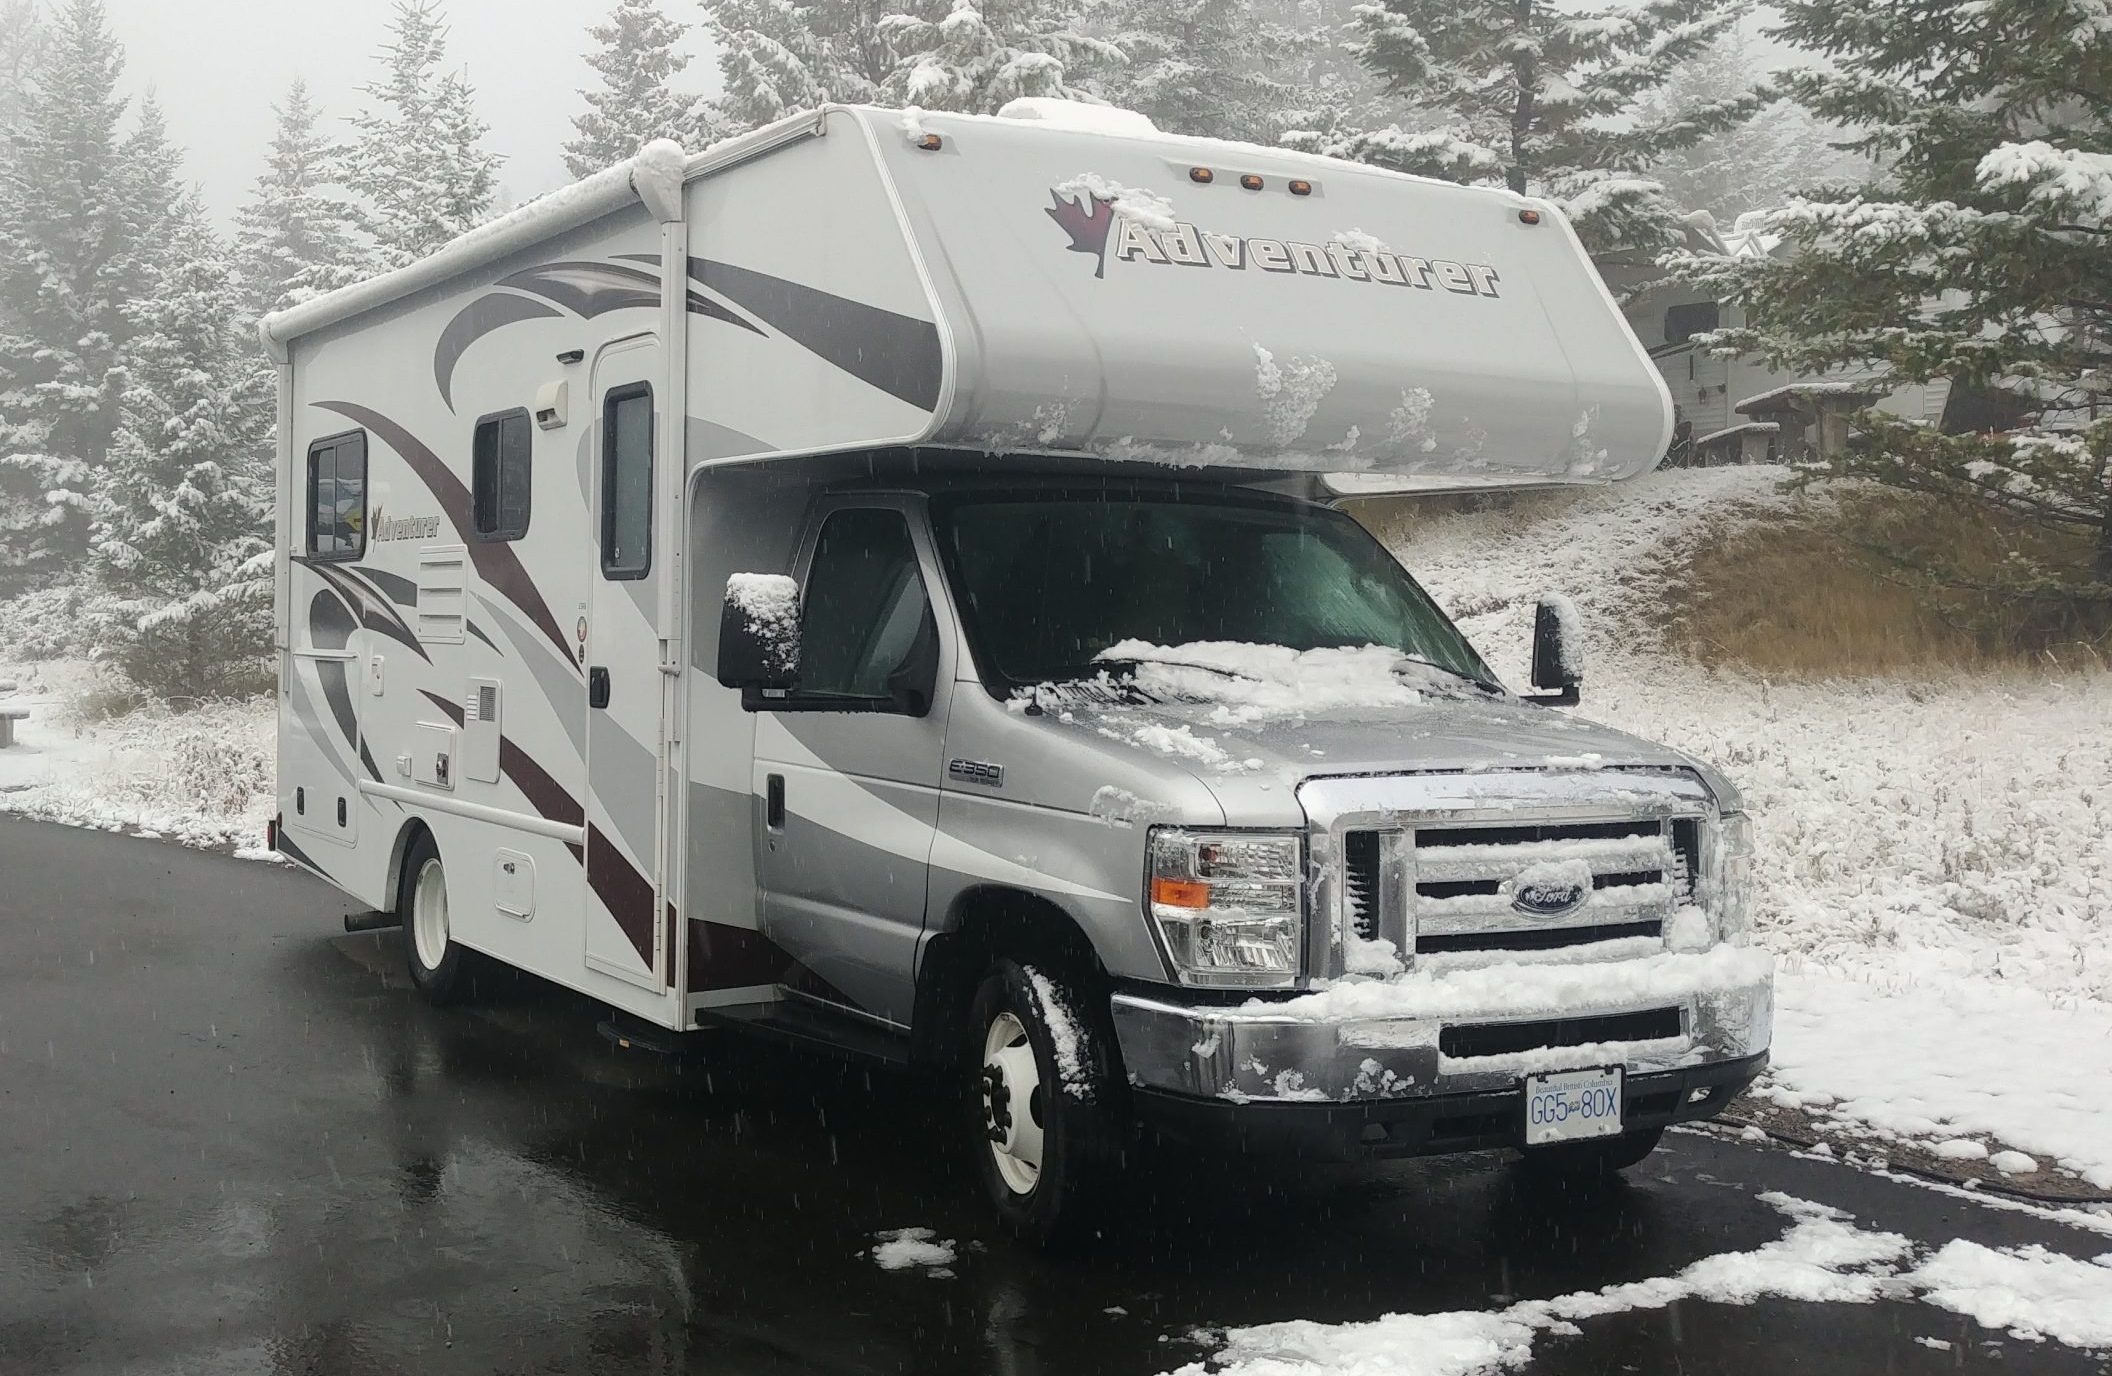 Texans Turn to RVs During Storm